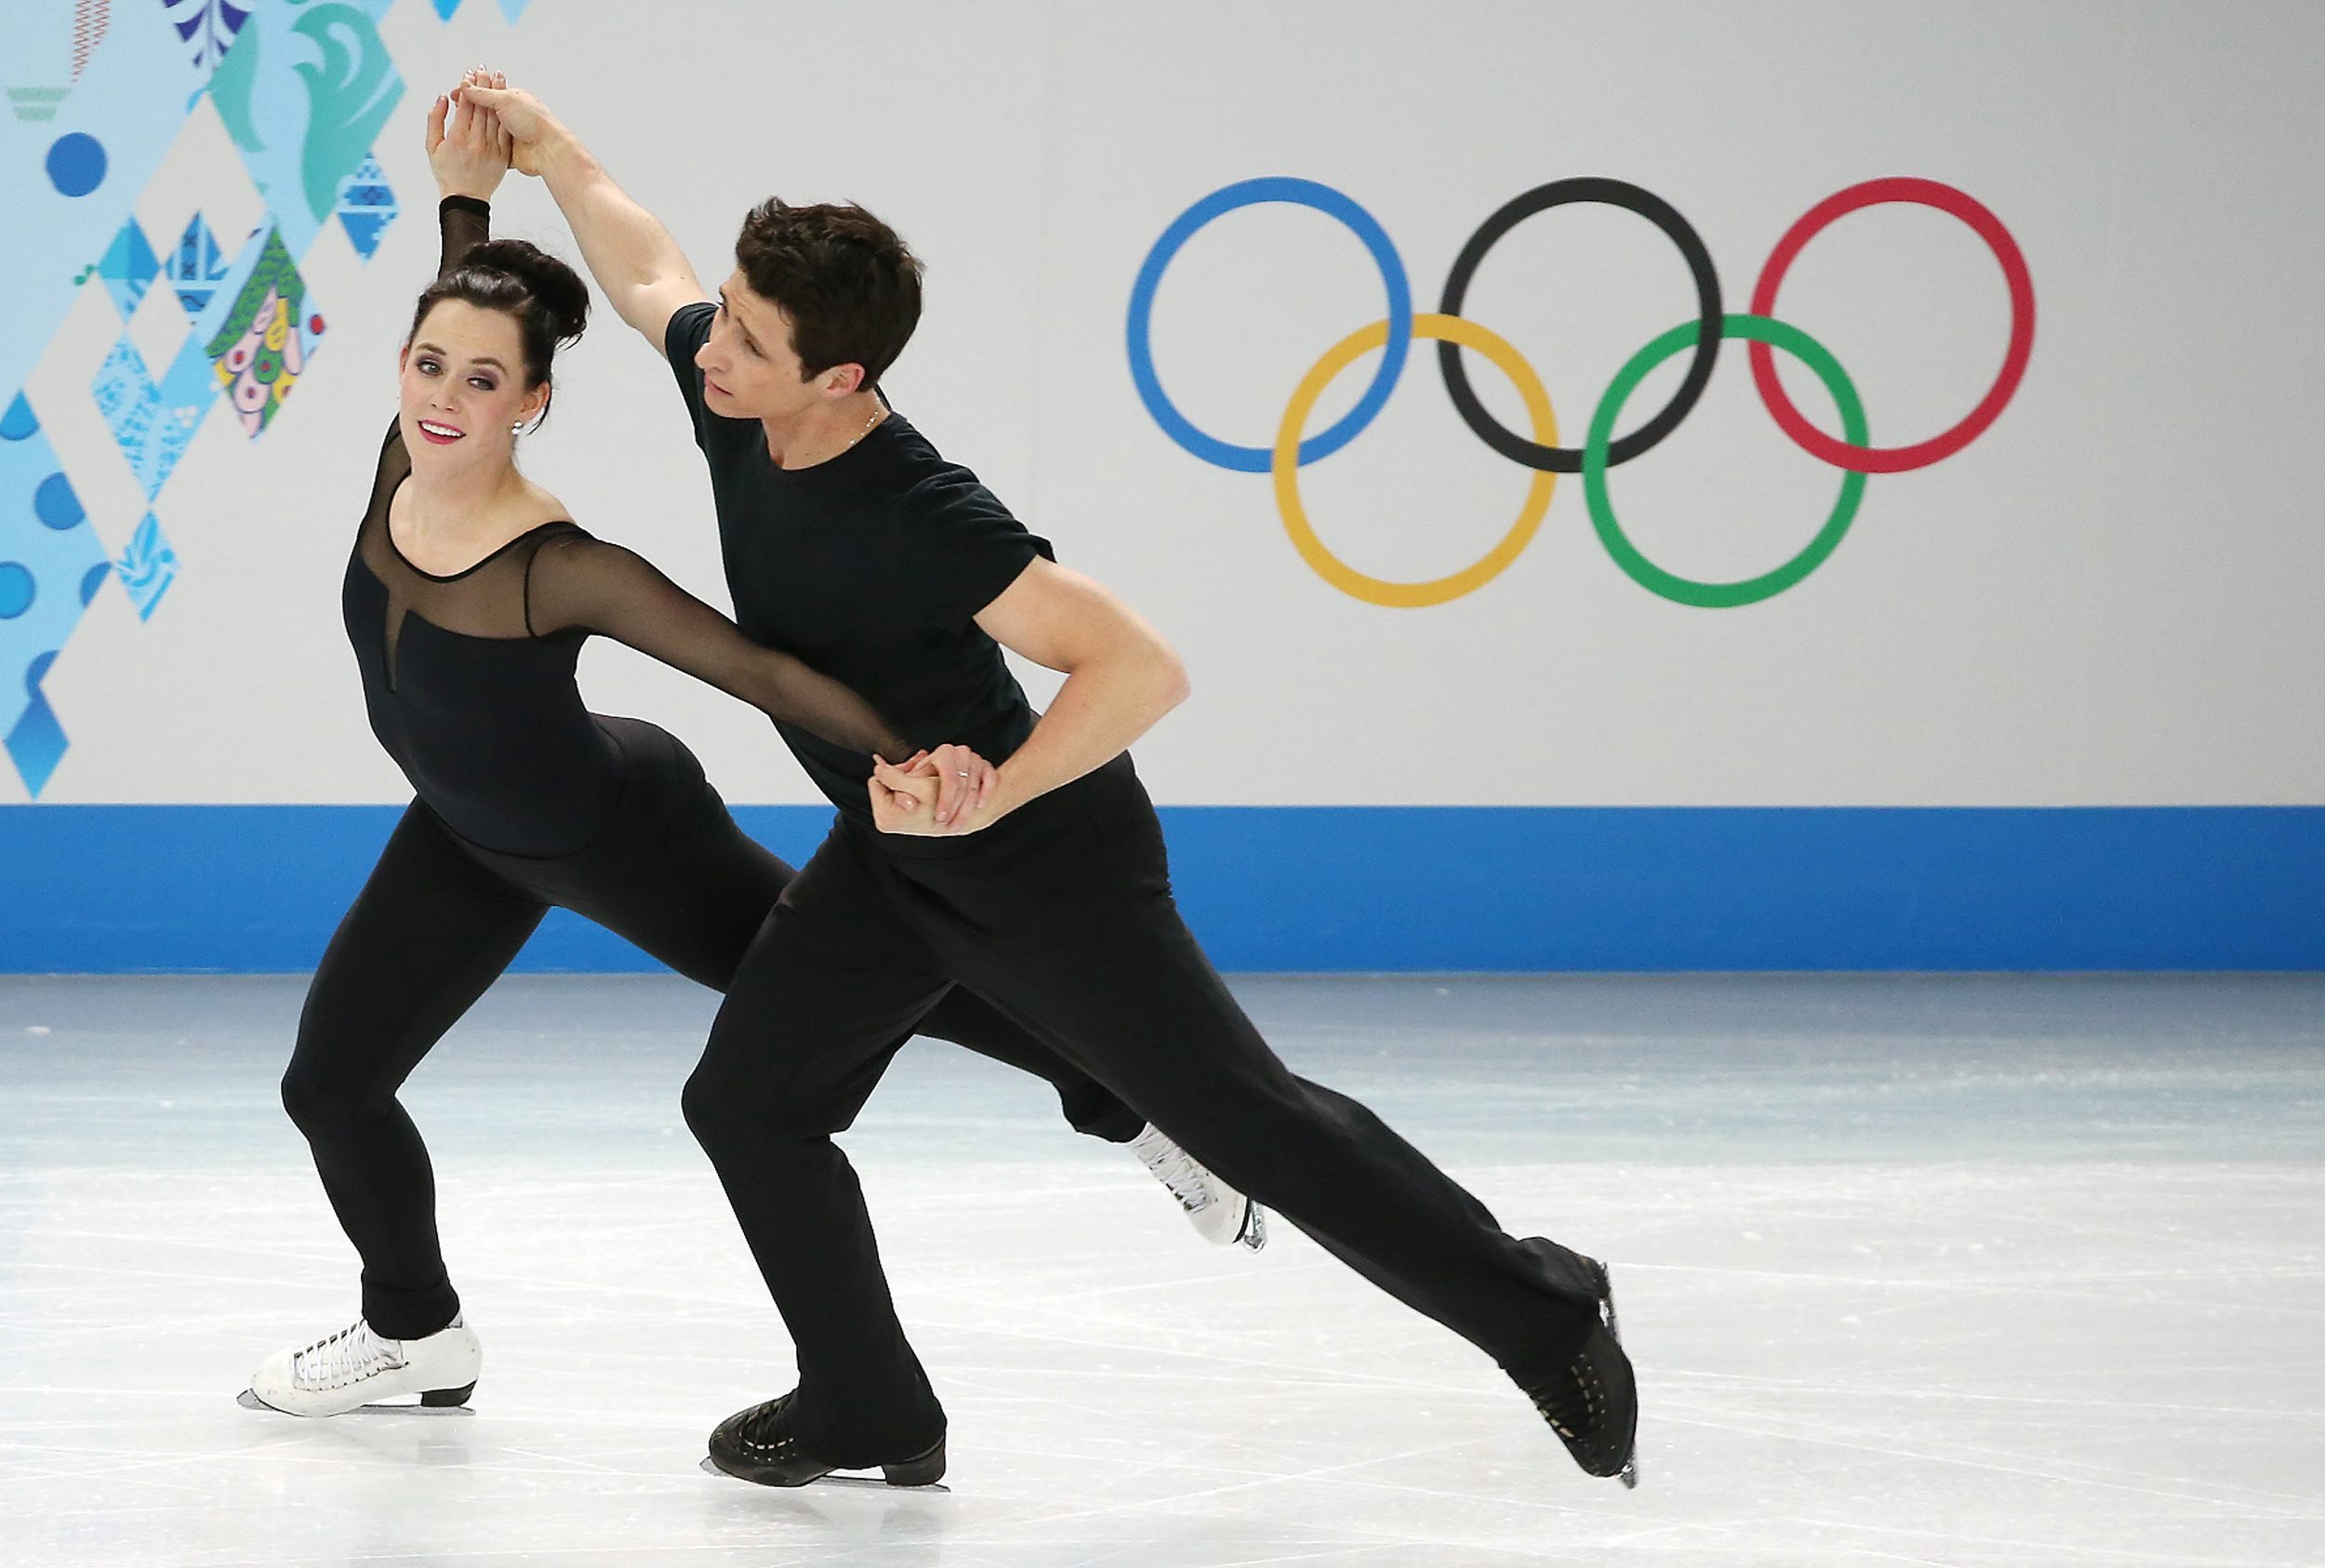 Sochi Olympics Team Figure Skating: What You Need to Know | Time